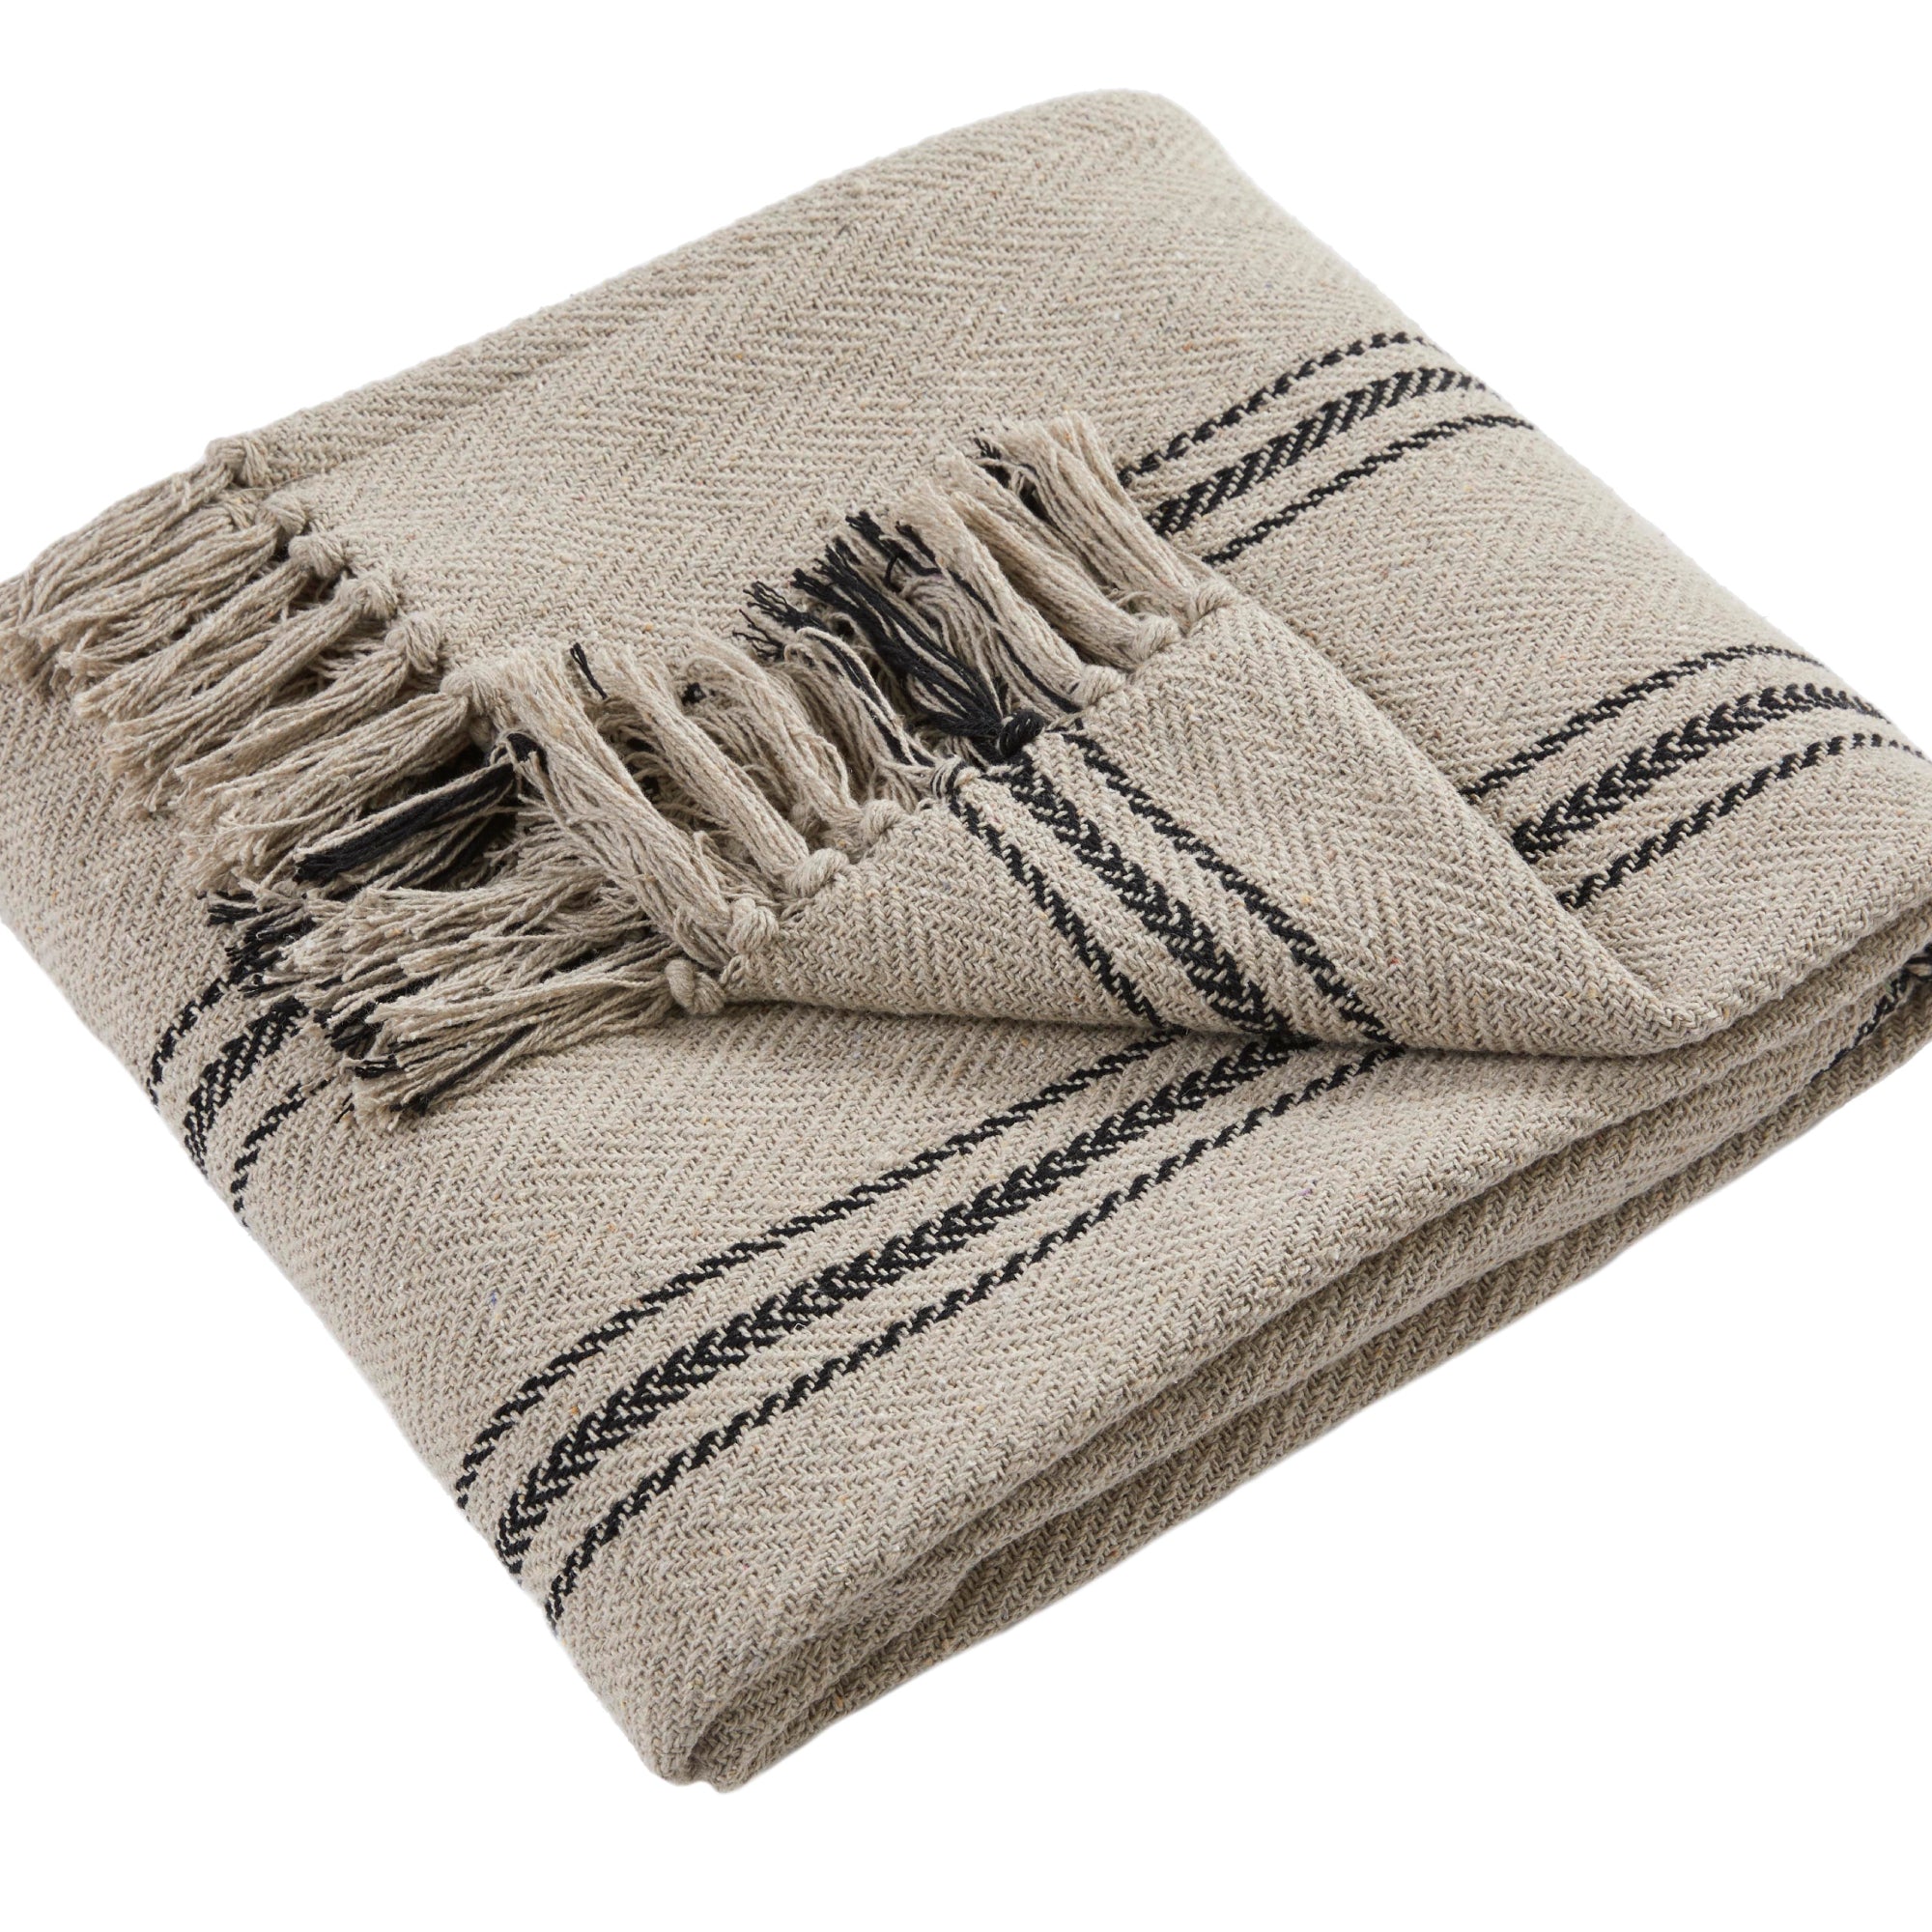 Throw Brinley by Drift Home in Natural